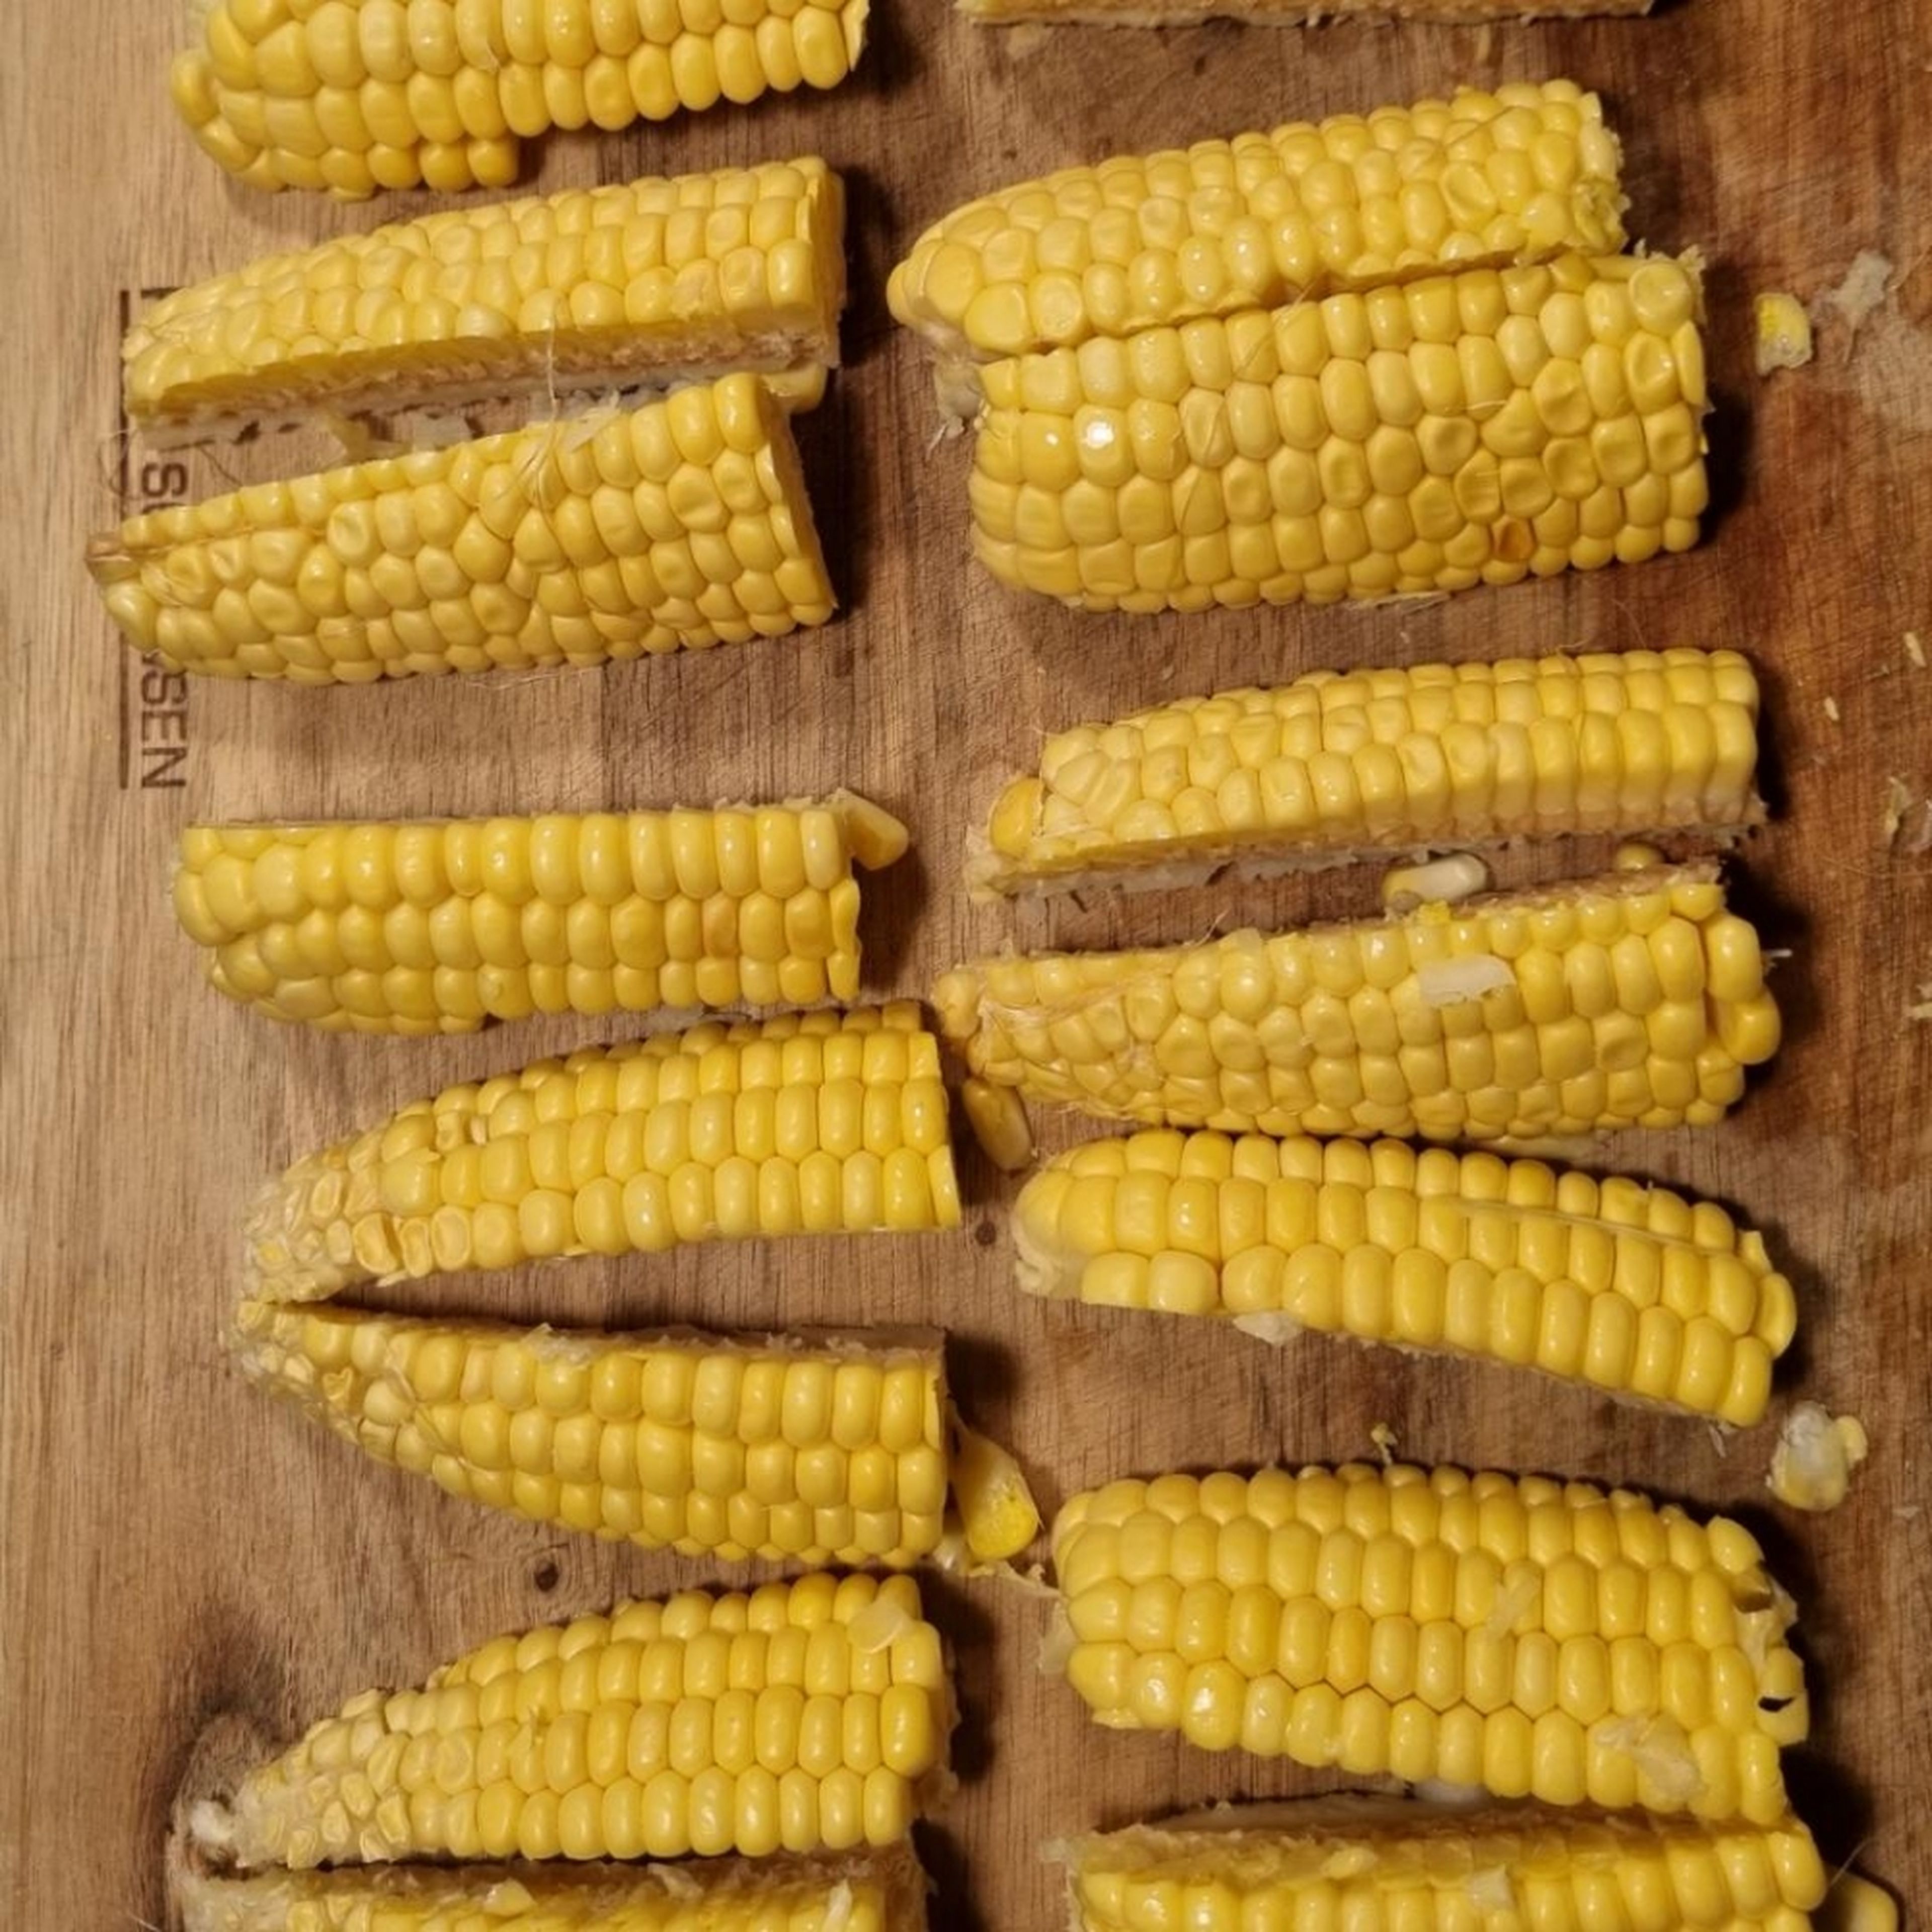 Chop the corn into quarters. Best to cut them in half and then into quarters.